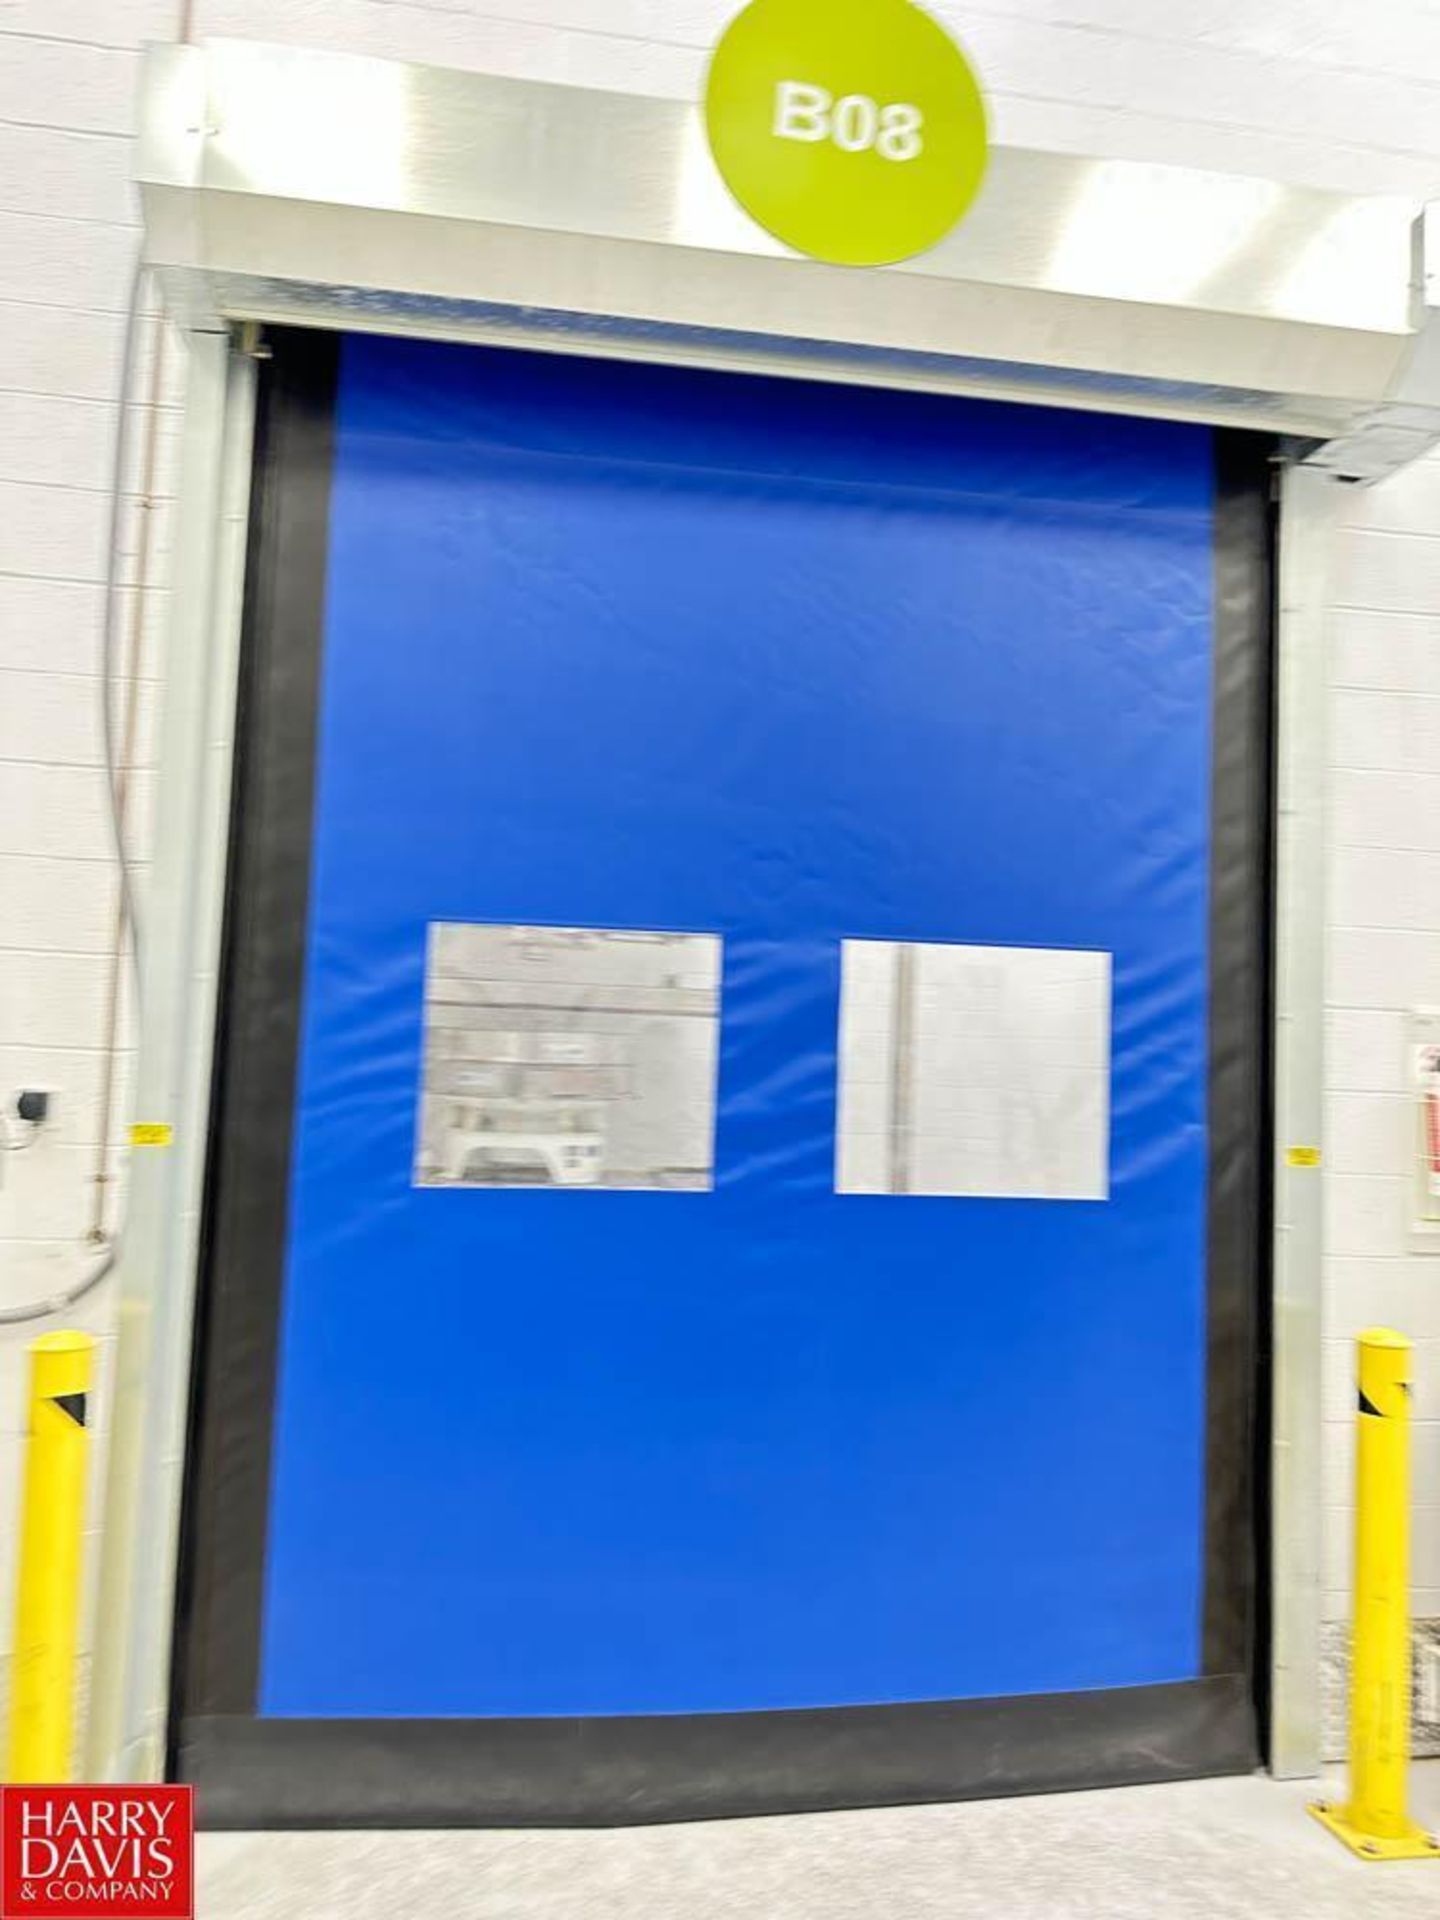 High Speed Roll-Up Door, Dimensions = 97" Width x 117" Length - Rigging Fee: $1250